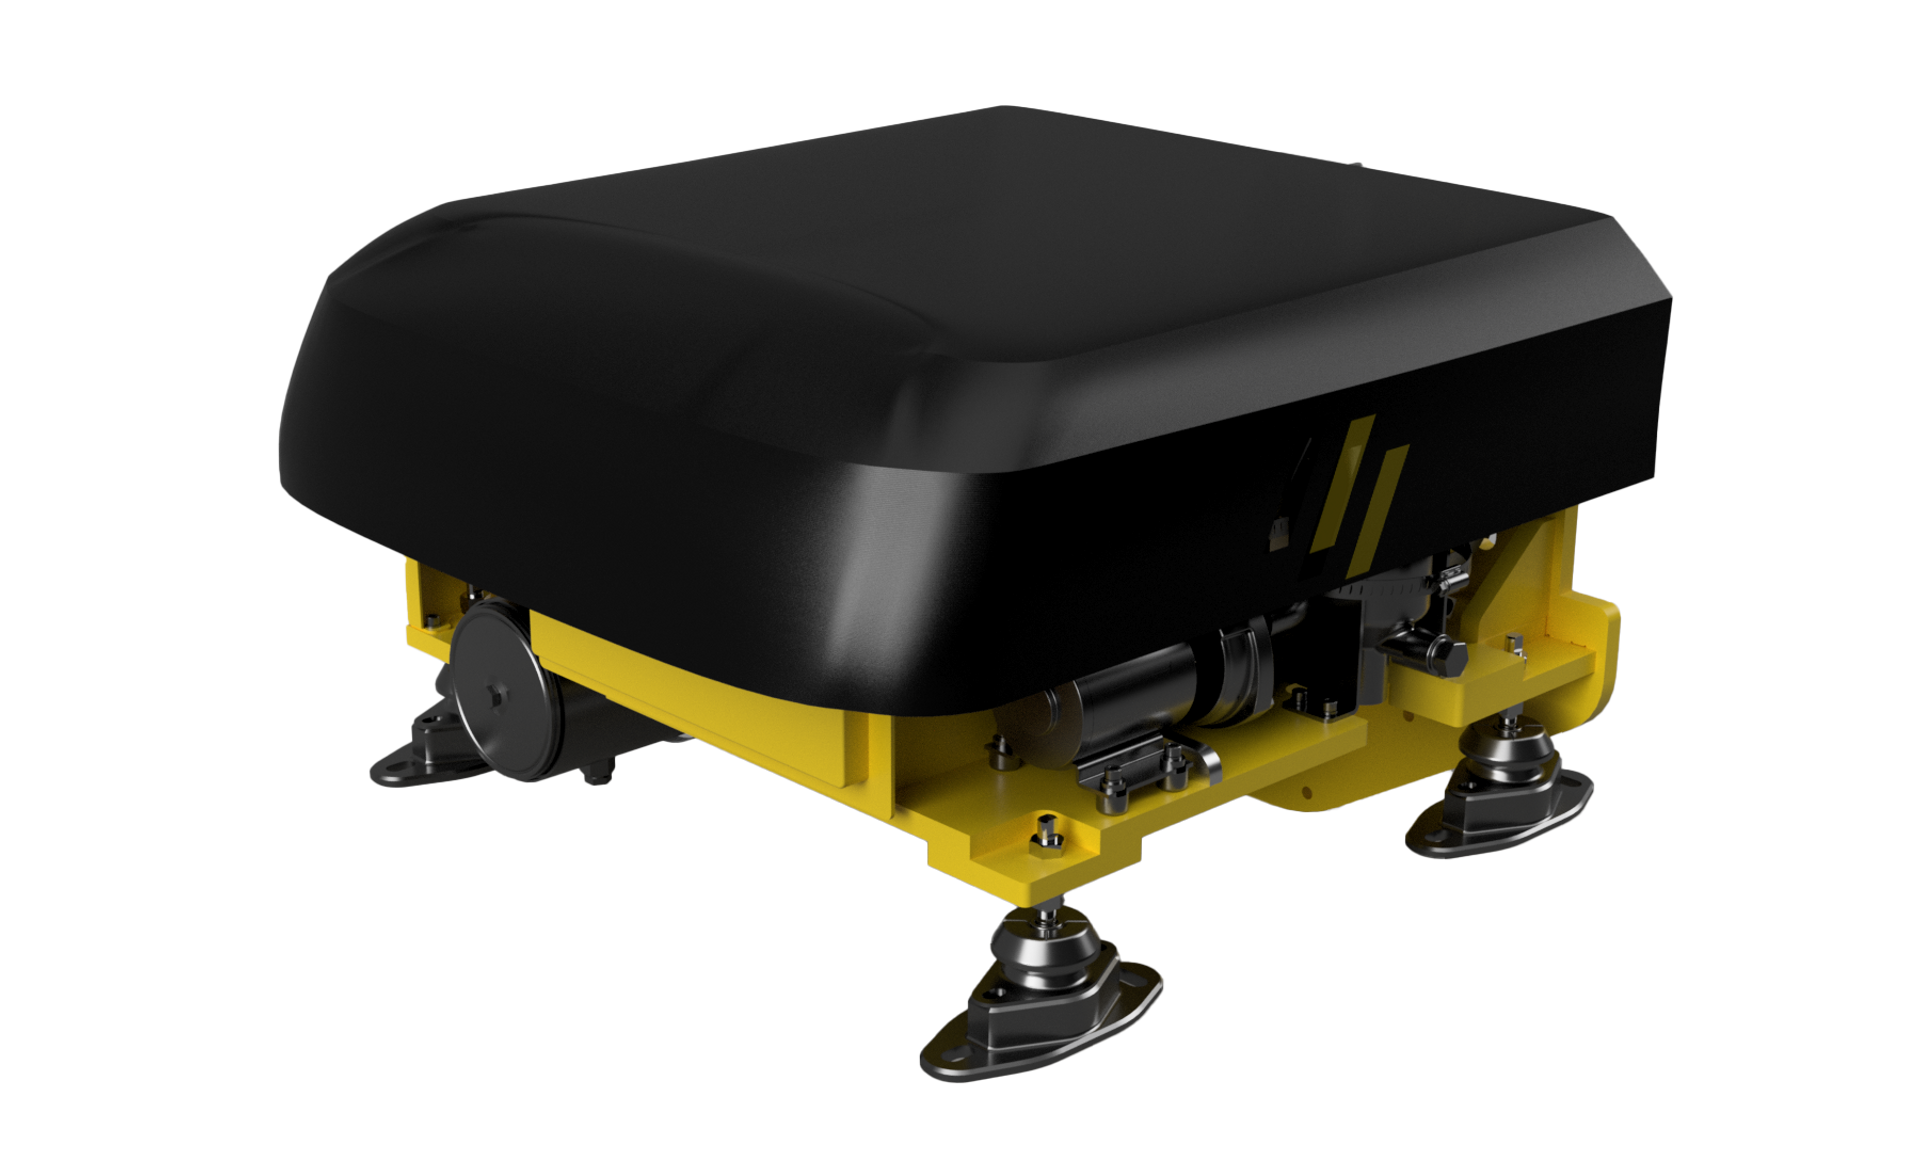 Square black and yellow electric inboard motor